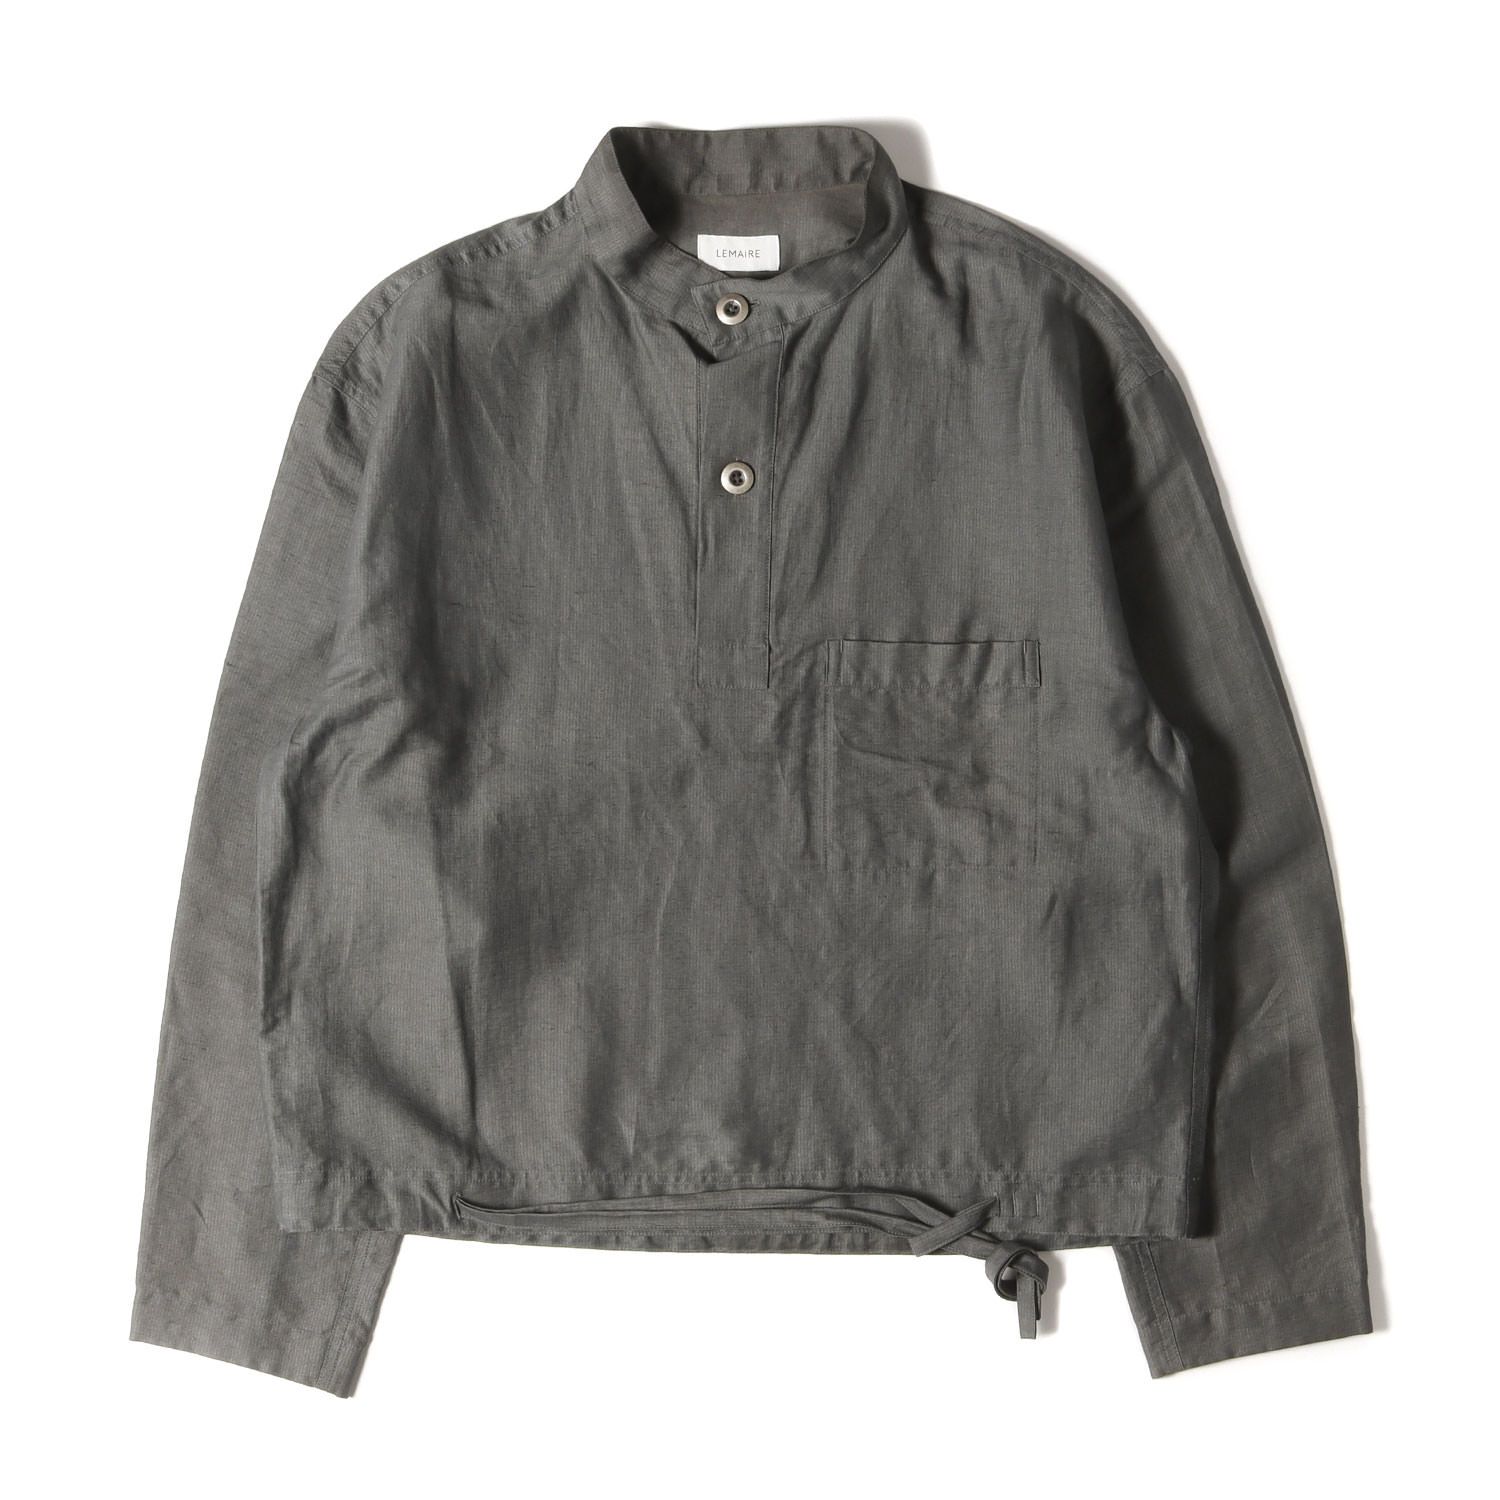 LEMAIRE ルメール 22SS BUTTON NECK TOP コットンツイル ボタンネックプルオーバーシャツ M221 TO132 LF729 44 DARK SLATE GREEN 半袖 トップス【新古品】【LEMAIRE】